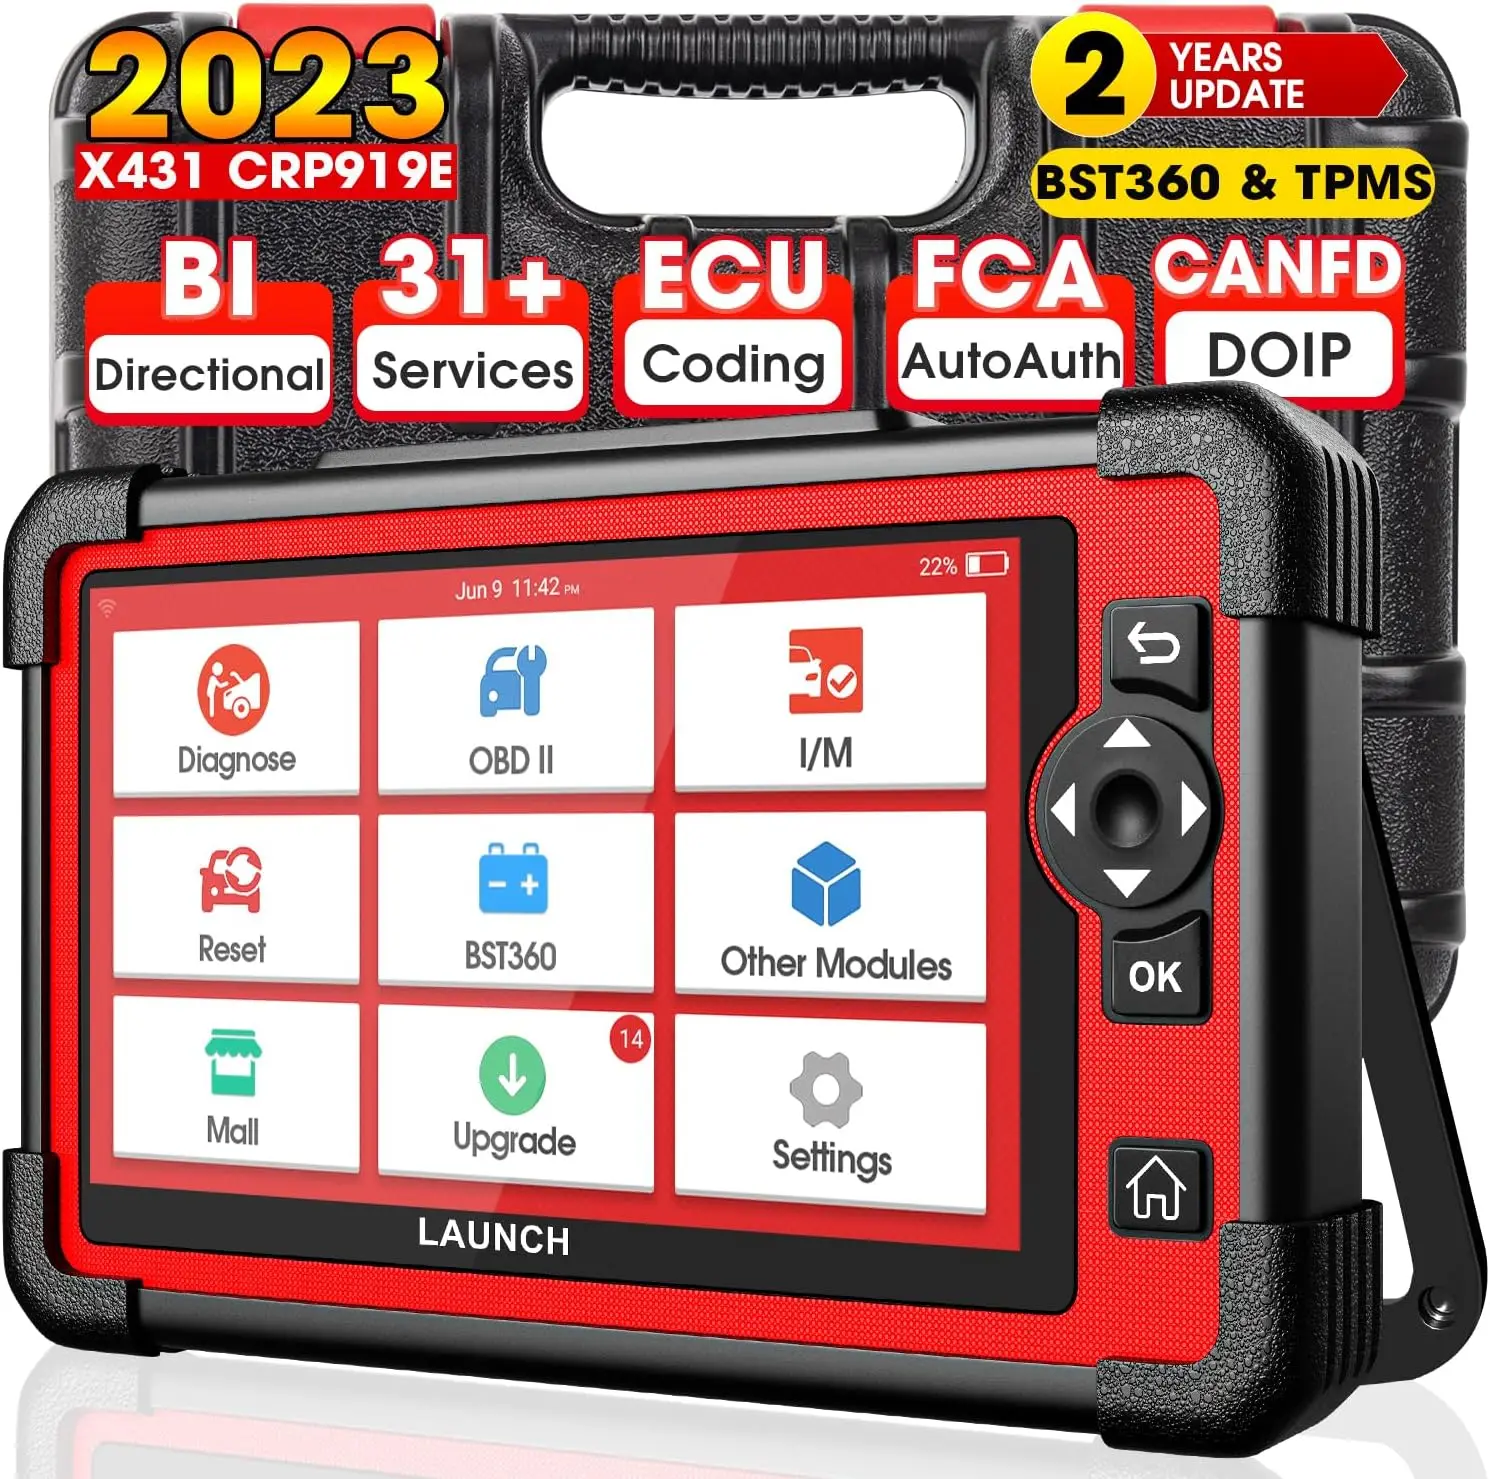 

LAUNCH X431 CRP919E Car Diagnostic Tool Scanner Full System Automotive Scanner Active Test CANFD/DIOP with 31 Reset